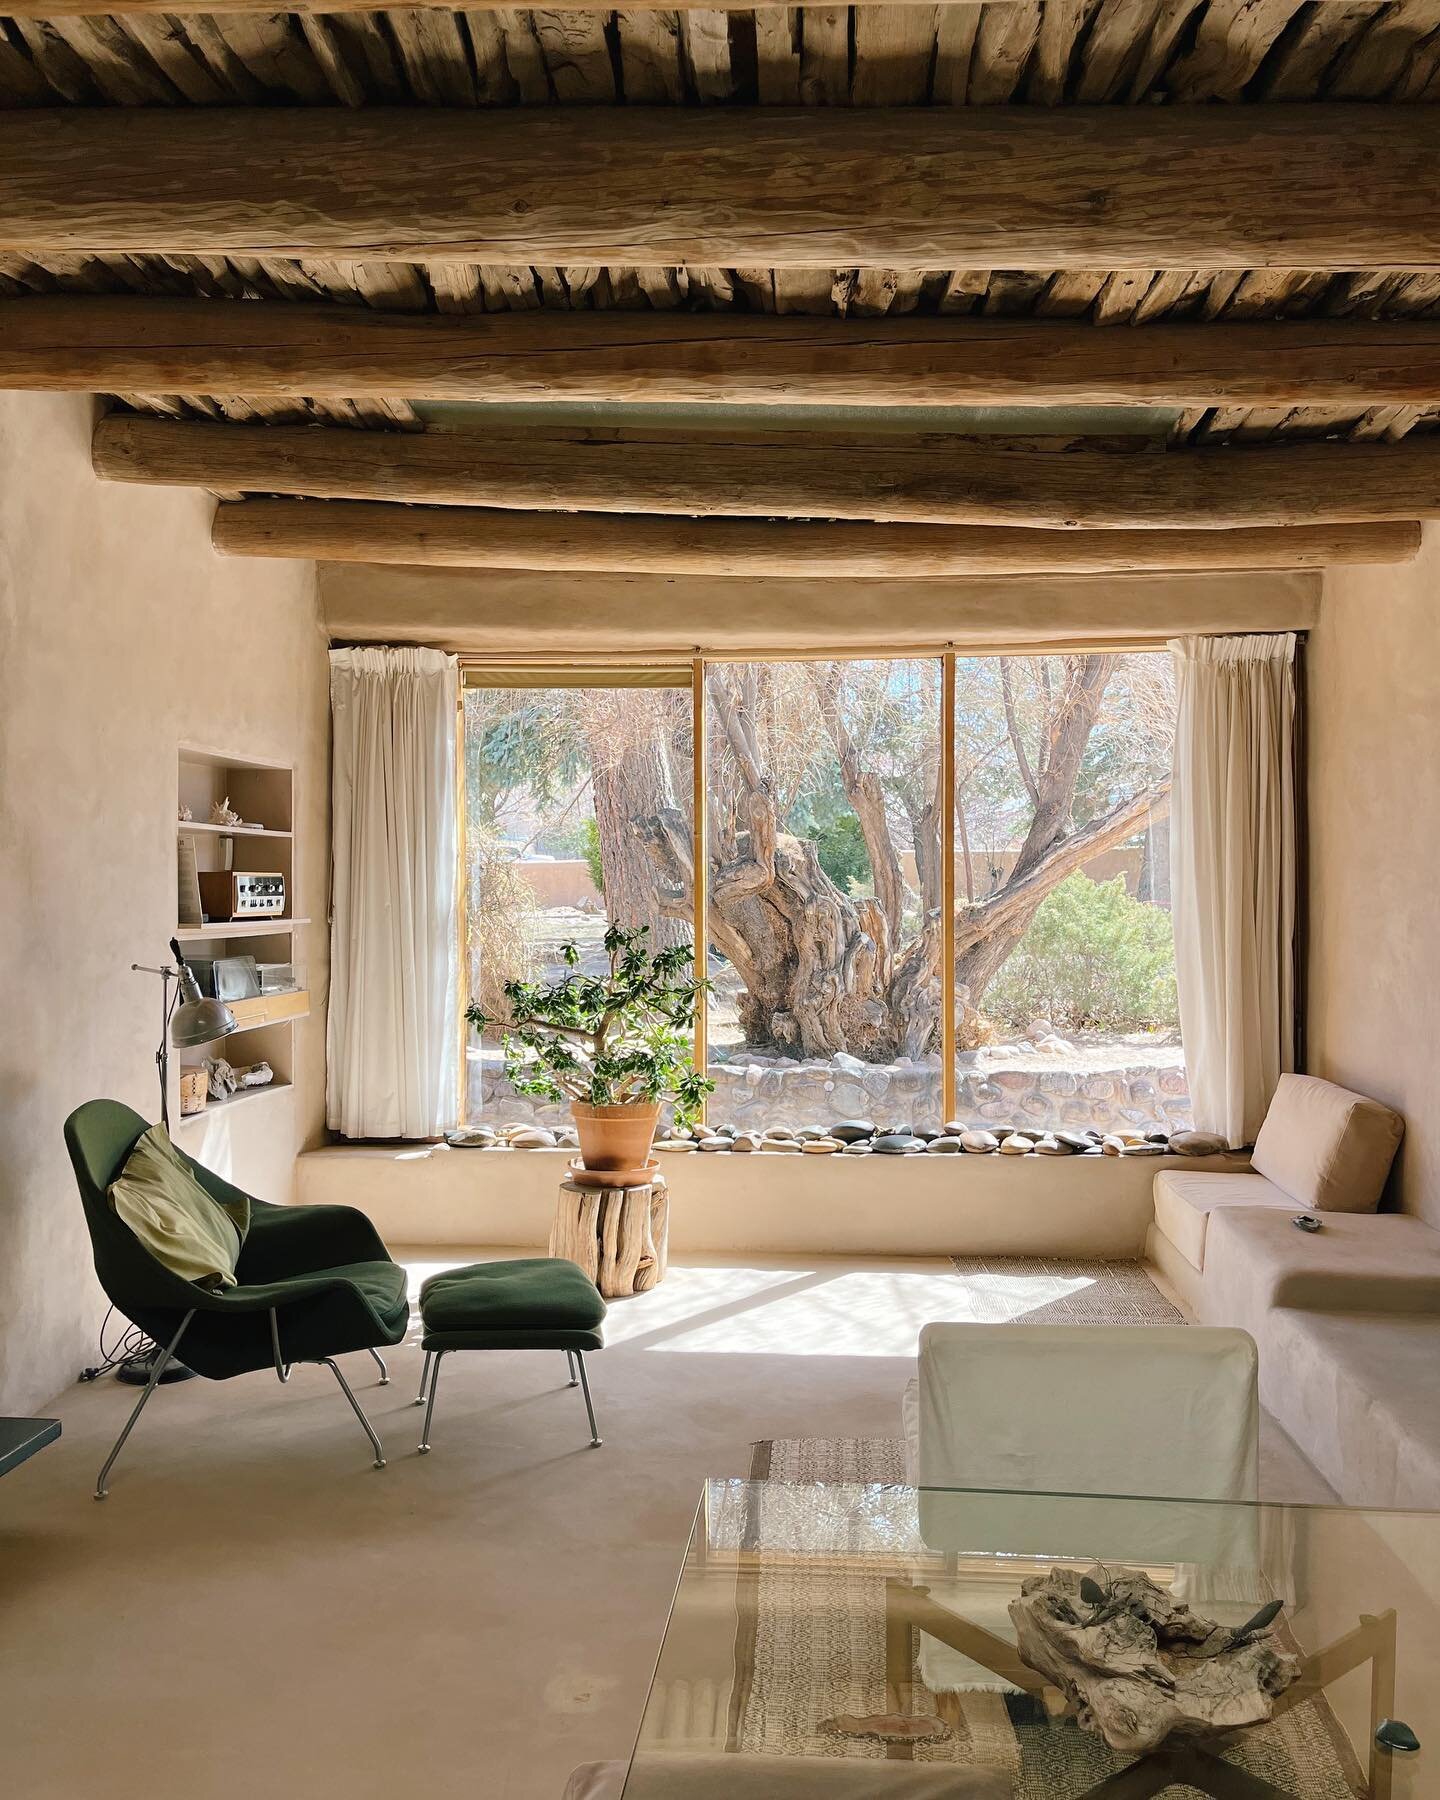 overwhelmed by the beauty of georgia o&rsquo;keeffe&rsquo;s home and studio in abiquiu, new mexico. o&rsquo;keeffe bought this high desert retreat for $500 in 1945 when it was in ruins and restored it to the quiet sanctuary it is today. peep the blen